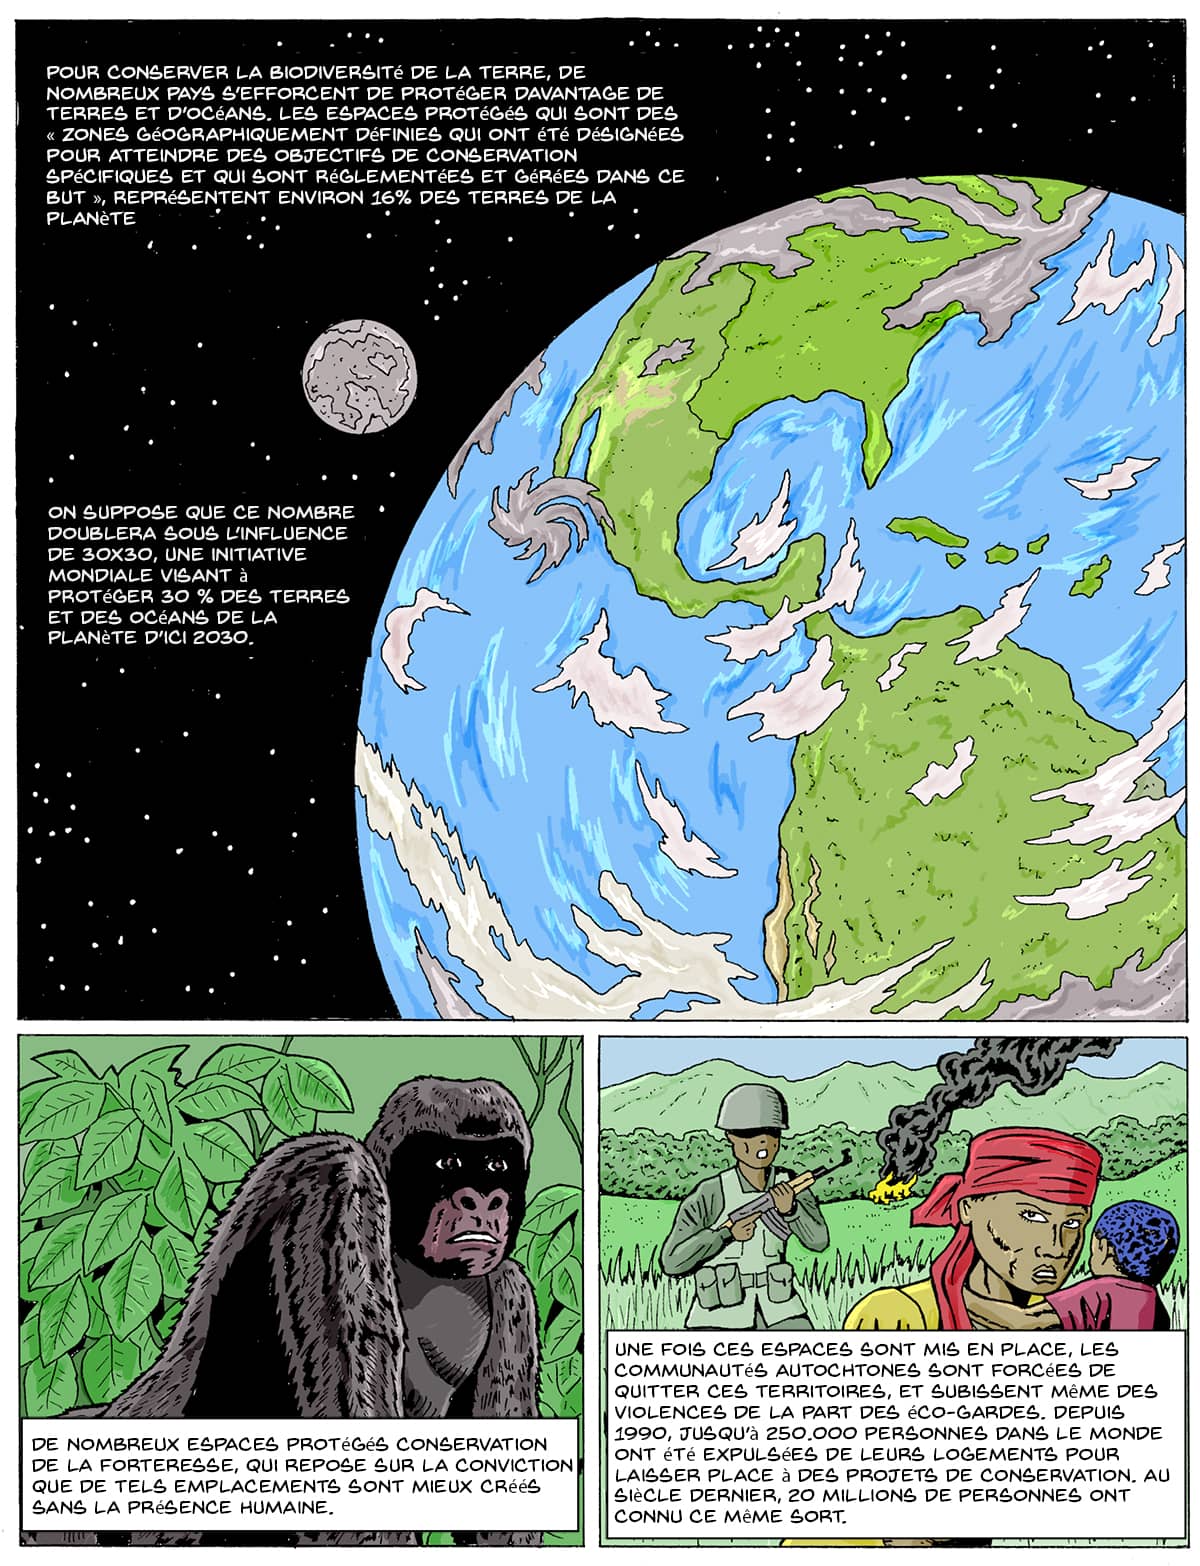 A triple-panel comic. Top panel: an illustration of the earth zoomed out also show the moon. The bottom two panels: A gorilla in the jungle; a woman holding a child looking at a soldier while a house burns in the background. Text: Fortress Conservation: A Legacy of Violence To conserve Earth’s biodiversity, many countries are pushing to protect more lands and oceans. Protected areas, a “geographically defined area which is designated or regulated and managed to achieve specific conservation objectives,” comprise roughly 16 percent of the world’s land. That number is expected to double under 30X30, a global initiative to protect 30 percent of the planet’s land and oceans by 2030. Many protected areas utilize a model called fortress conservation, which is based on the belief that such locations are best created without the presence of humans. Once established, newly protected areas force Indigenous communities to face evictions and violence at the hands of eco-guards. Since 1990, up to 250,000 people worldwide have been evicted from their homes for conservation projects. In the last century, close to 20 million.